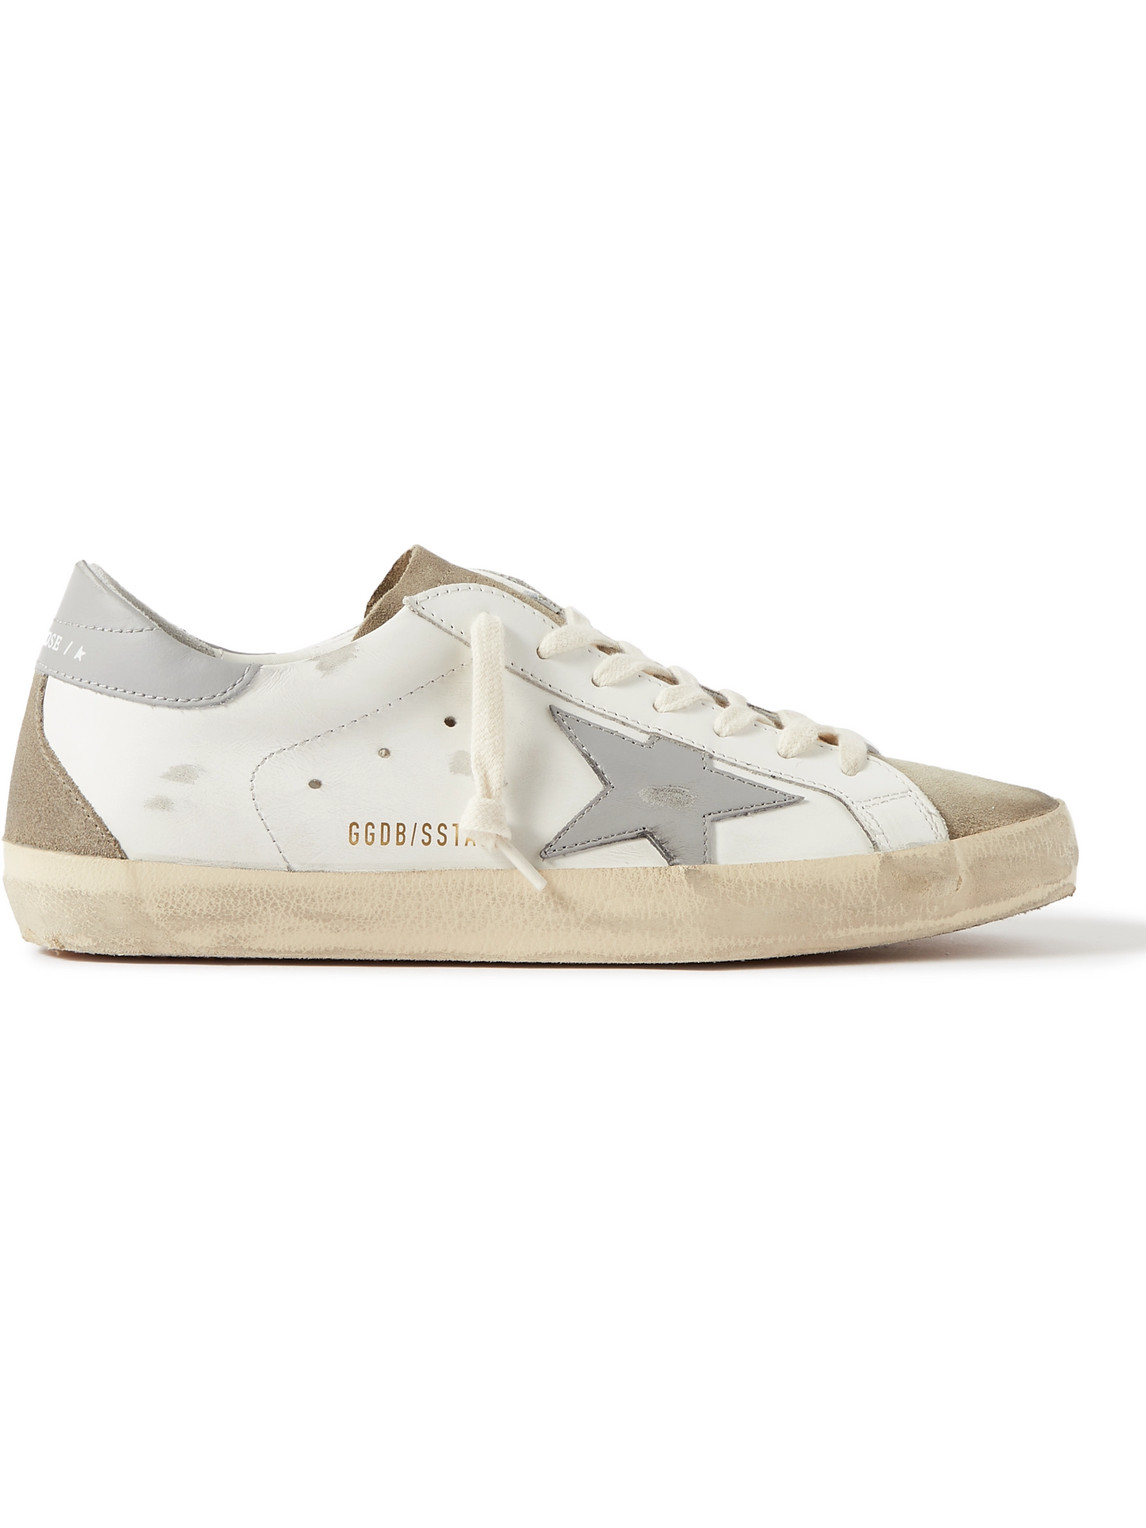 Superstar Distressed Leather and Suede Sneakers